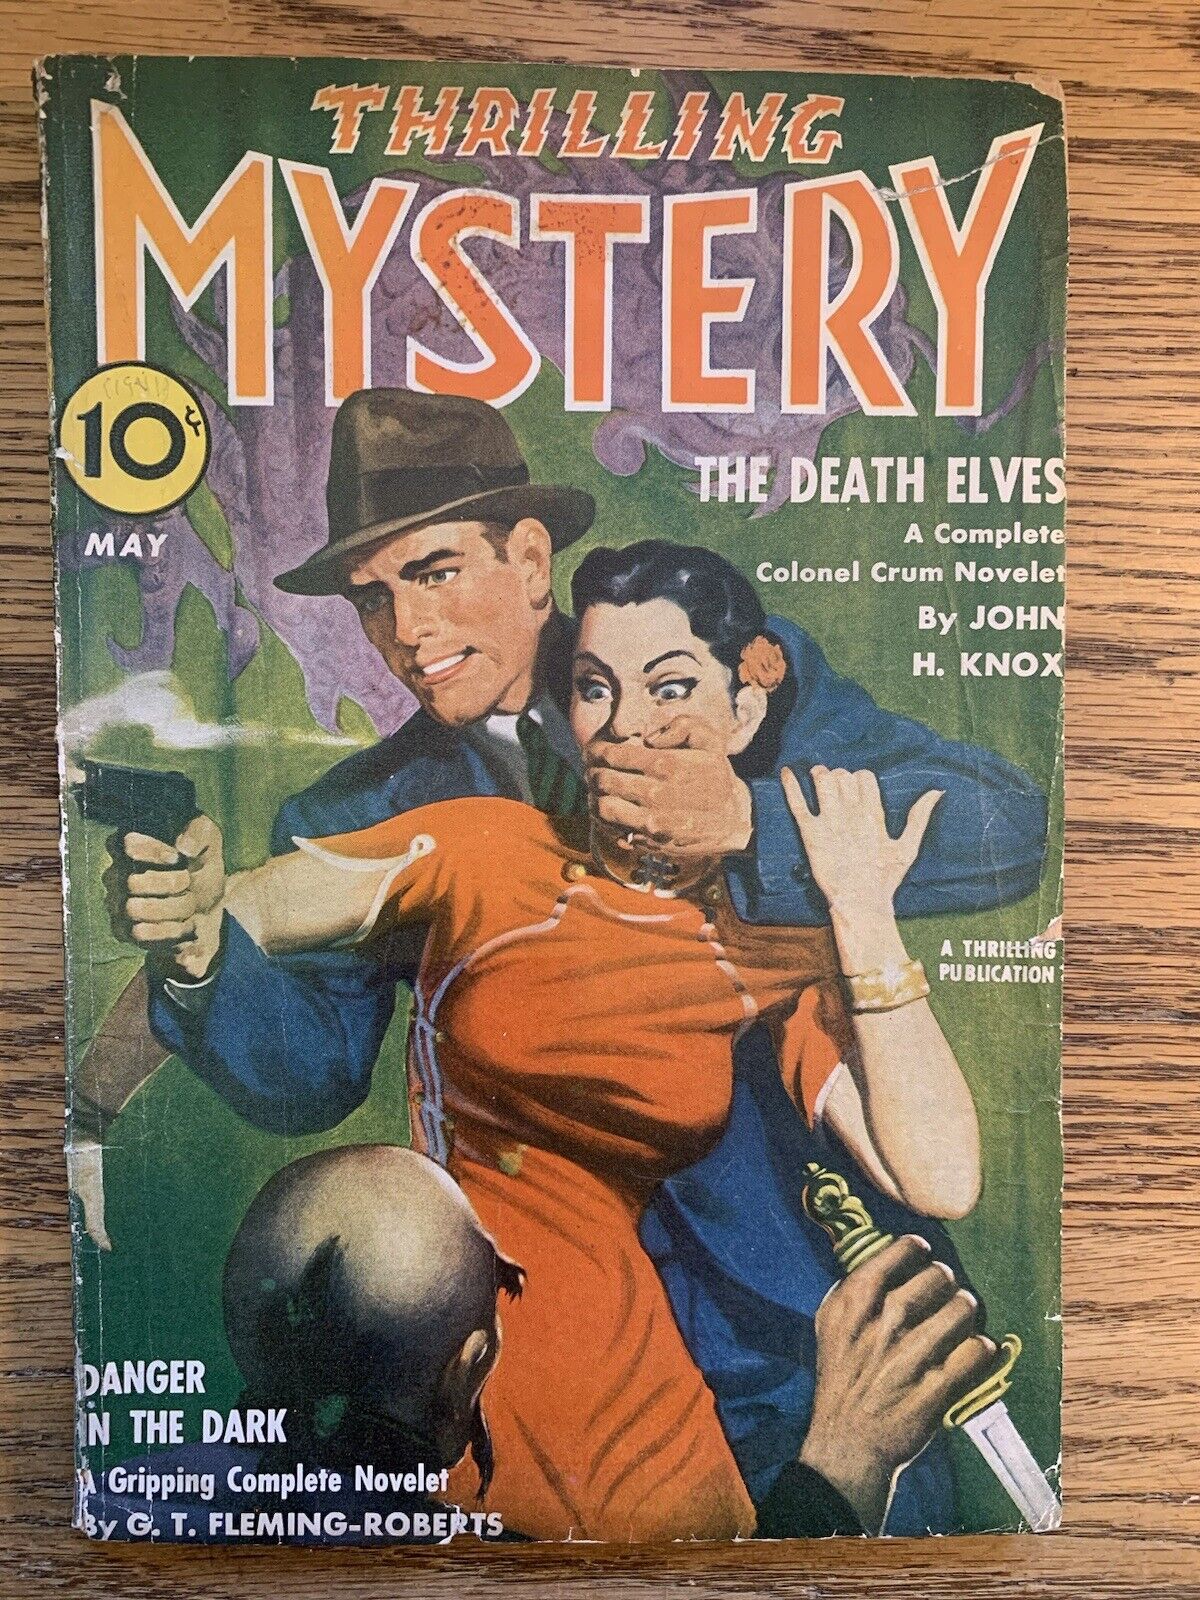 RARE may 1941 THRILLING MYSTERY PULP Classic Cover FN